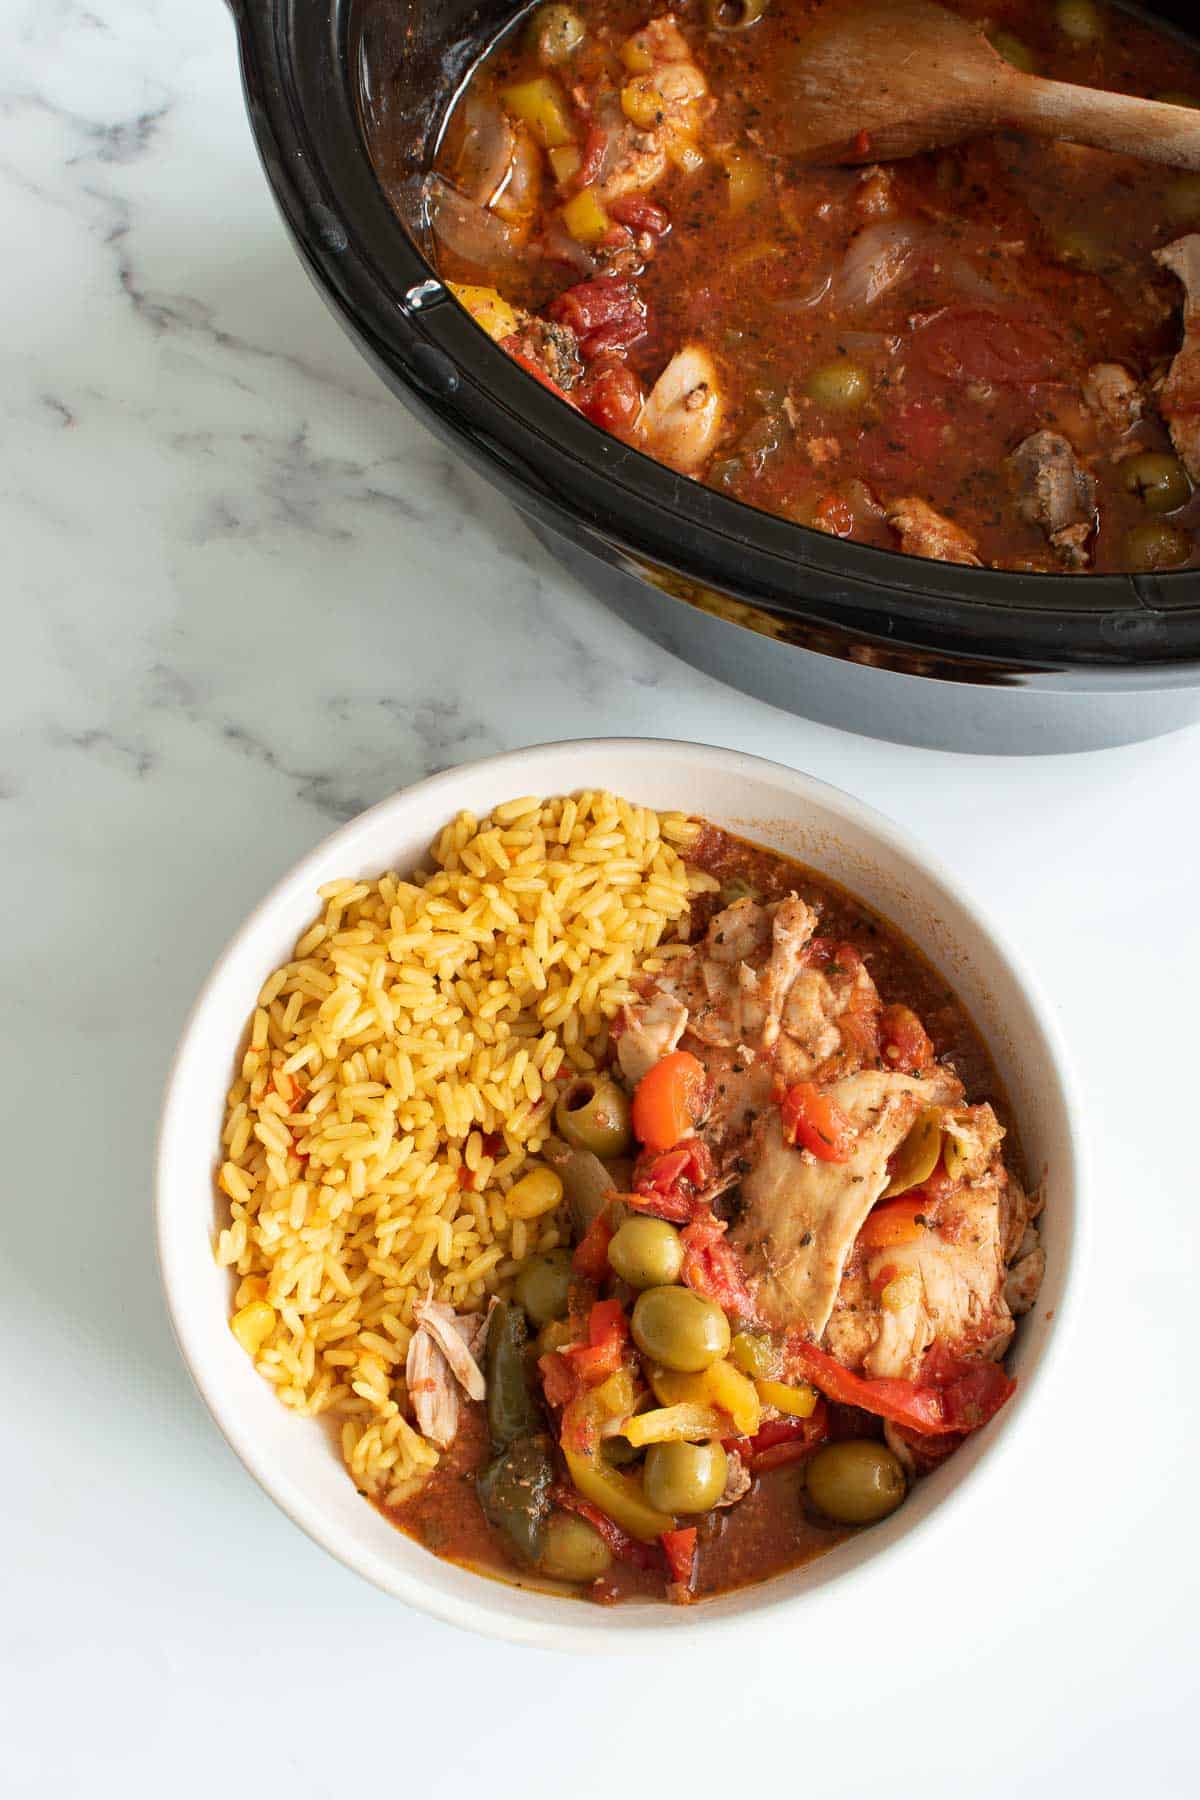 Chicken, olive and pepper stew with rice on the side.